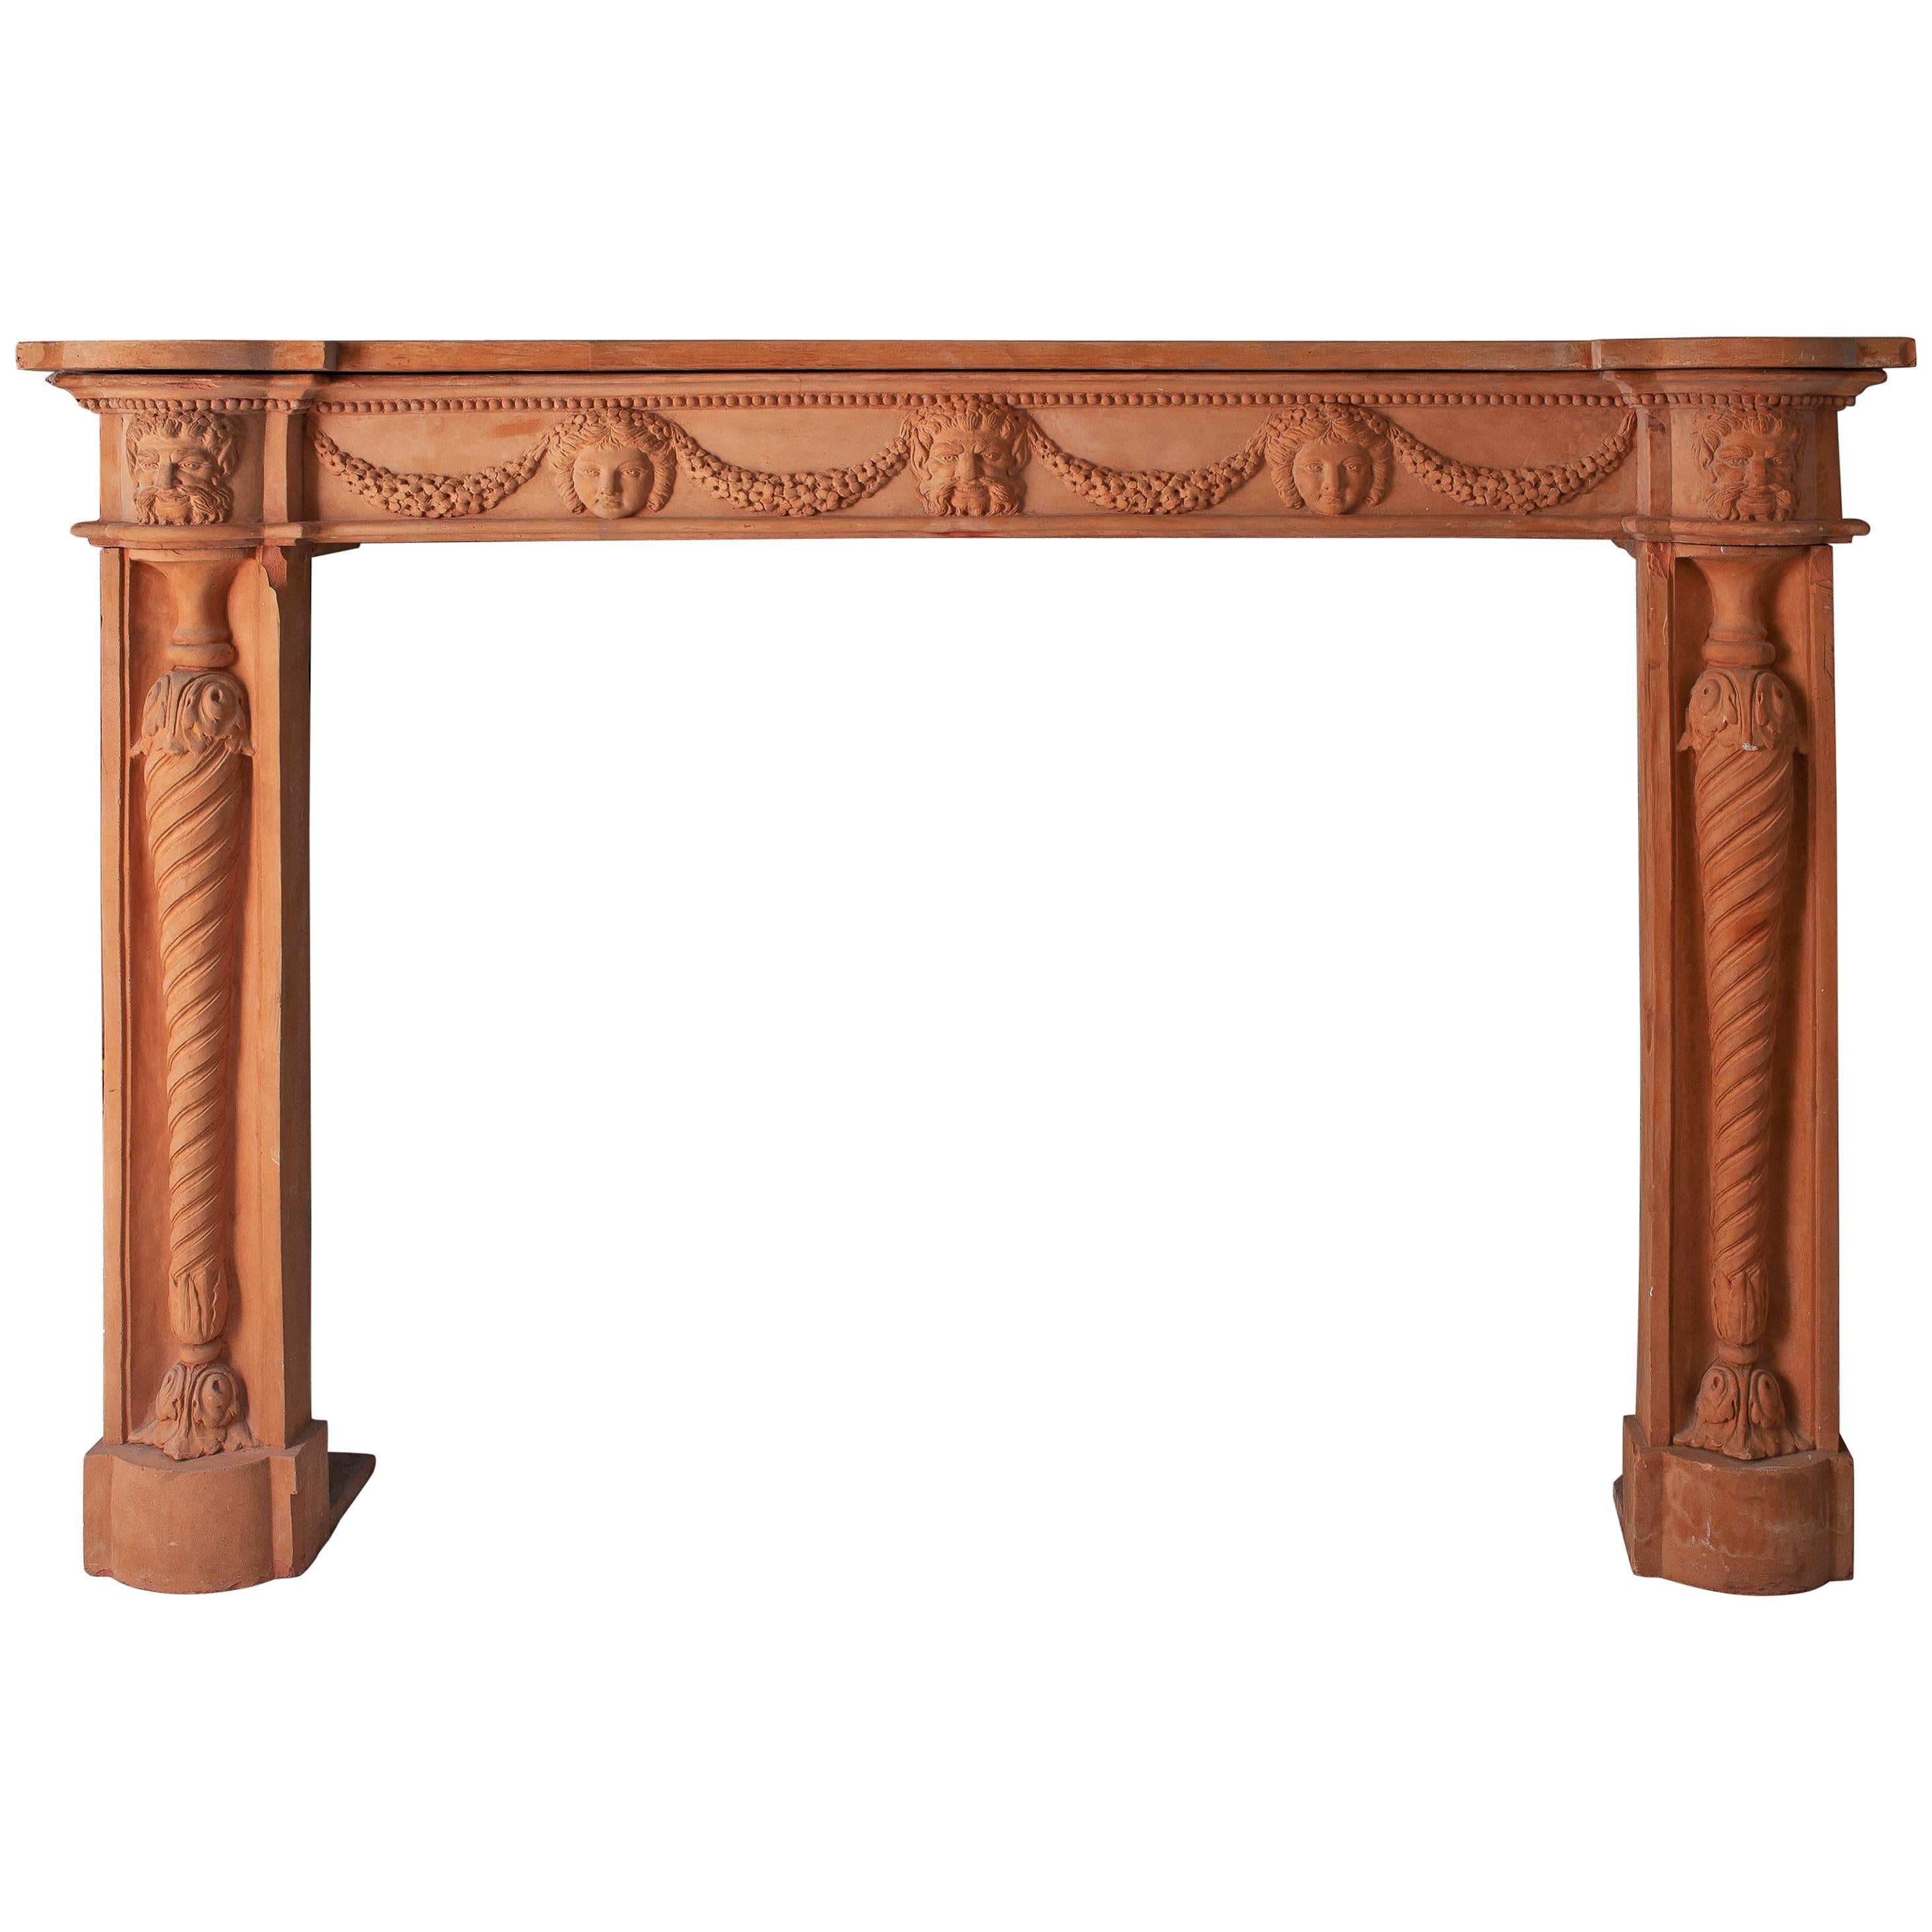 Louis XVI Style Terracotta Fireplace, 19th Century For Sale